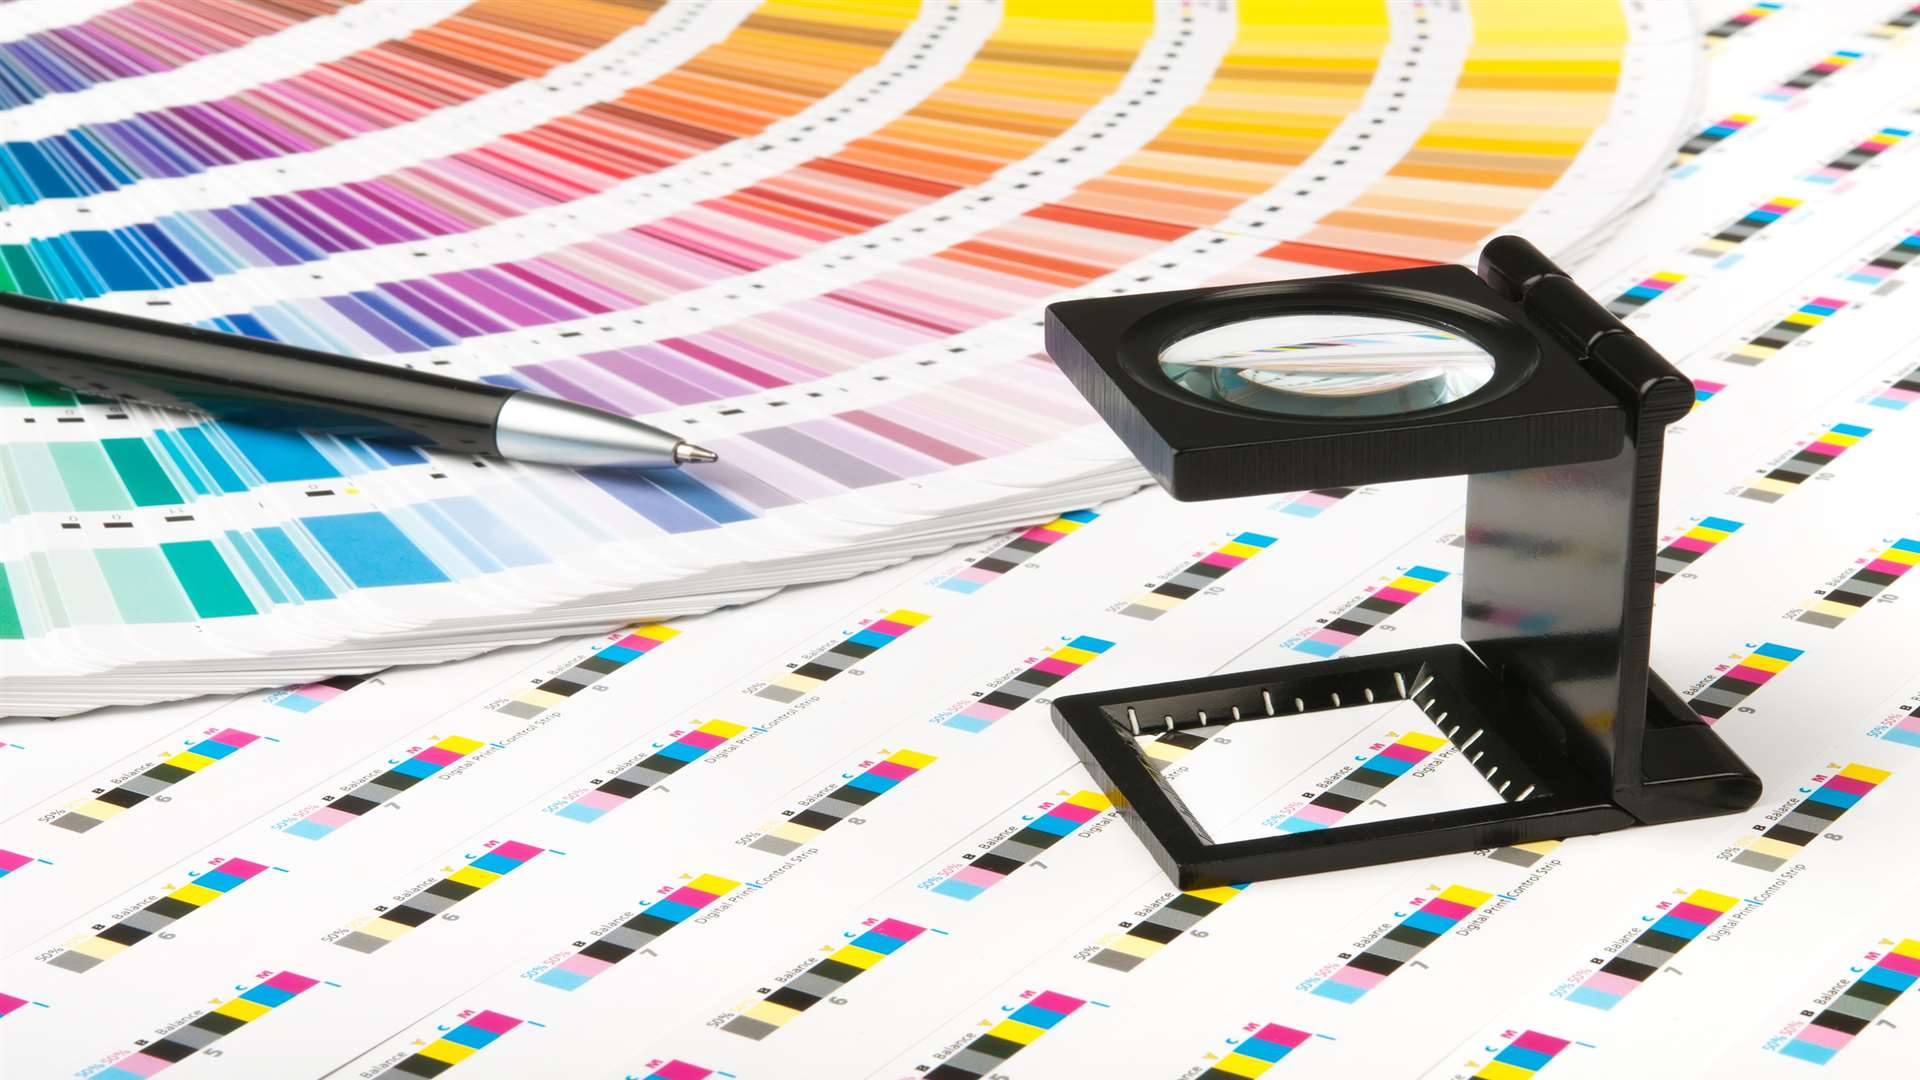 NXP Europe is a digital printing business